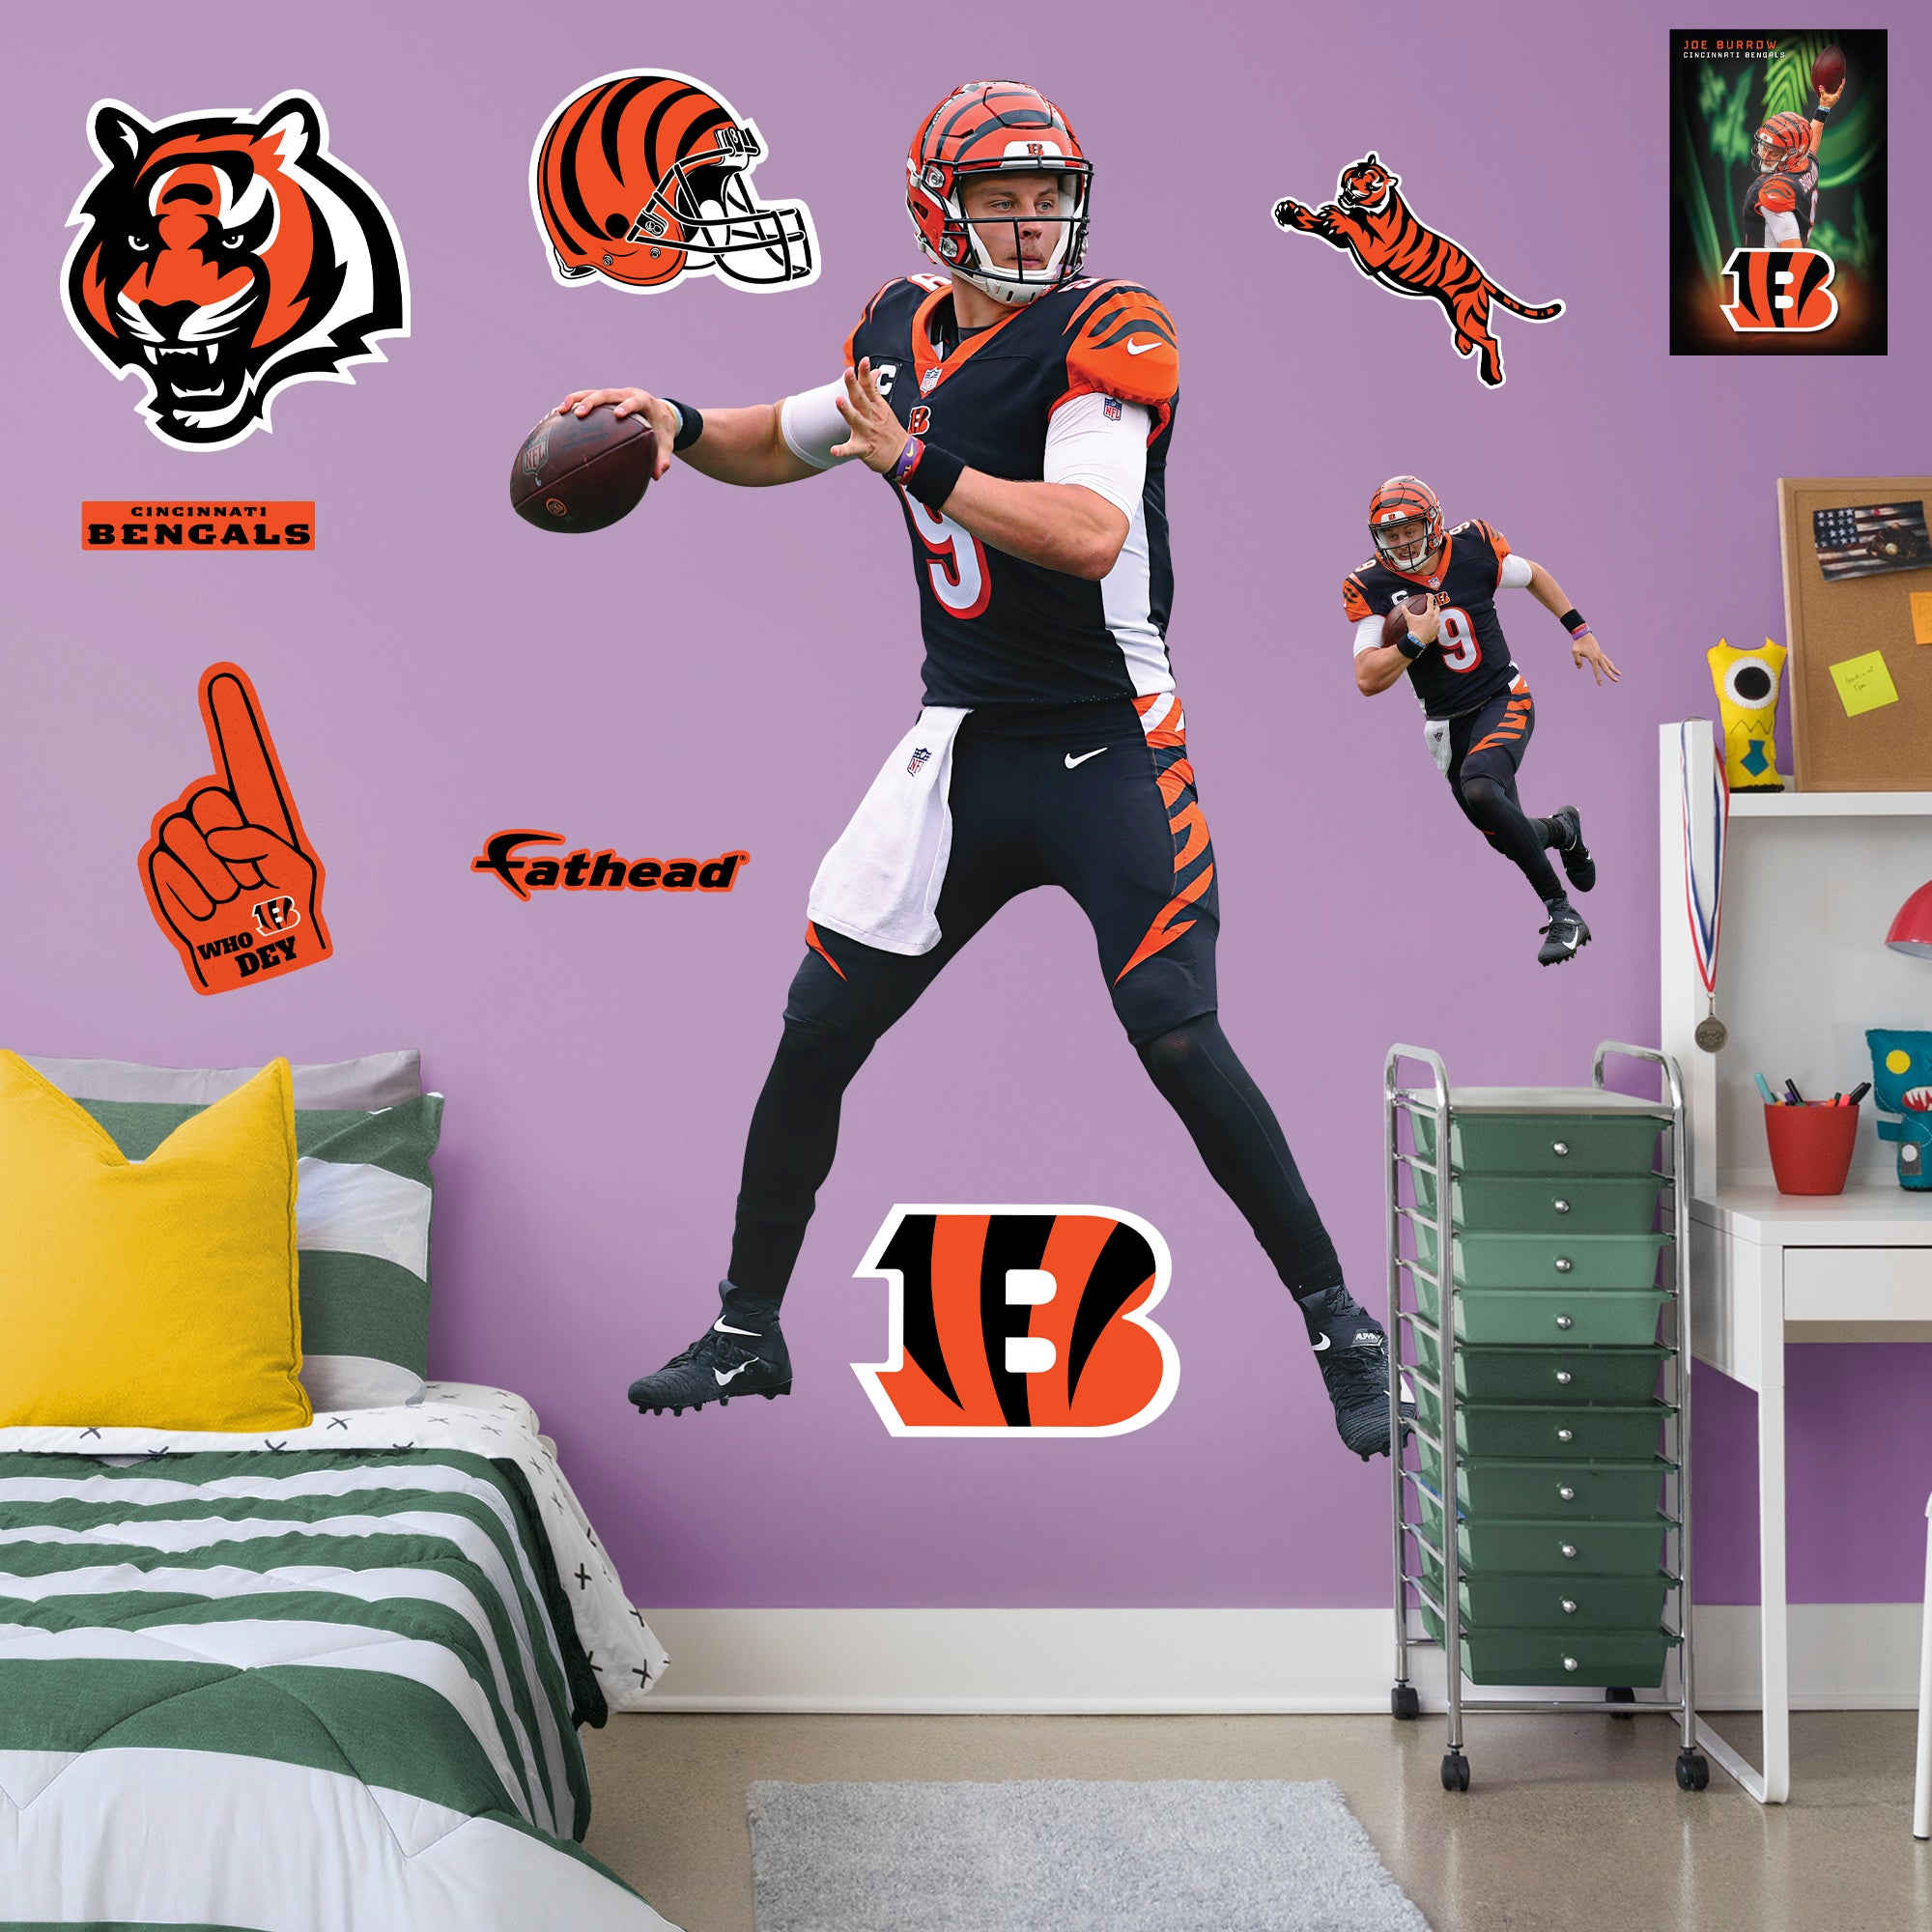 Joe Burrow: RealBig Officially Licensed NFL Removable Wall Decal Life-Size Athlete + 9 Decals by Fathead | Vinyl